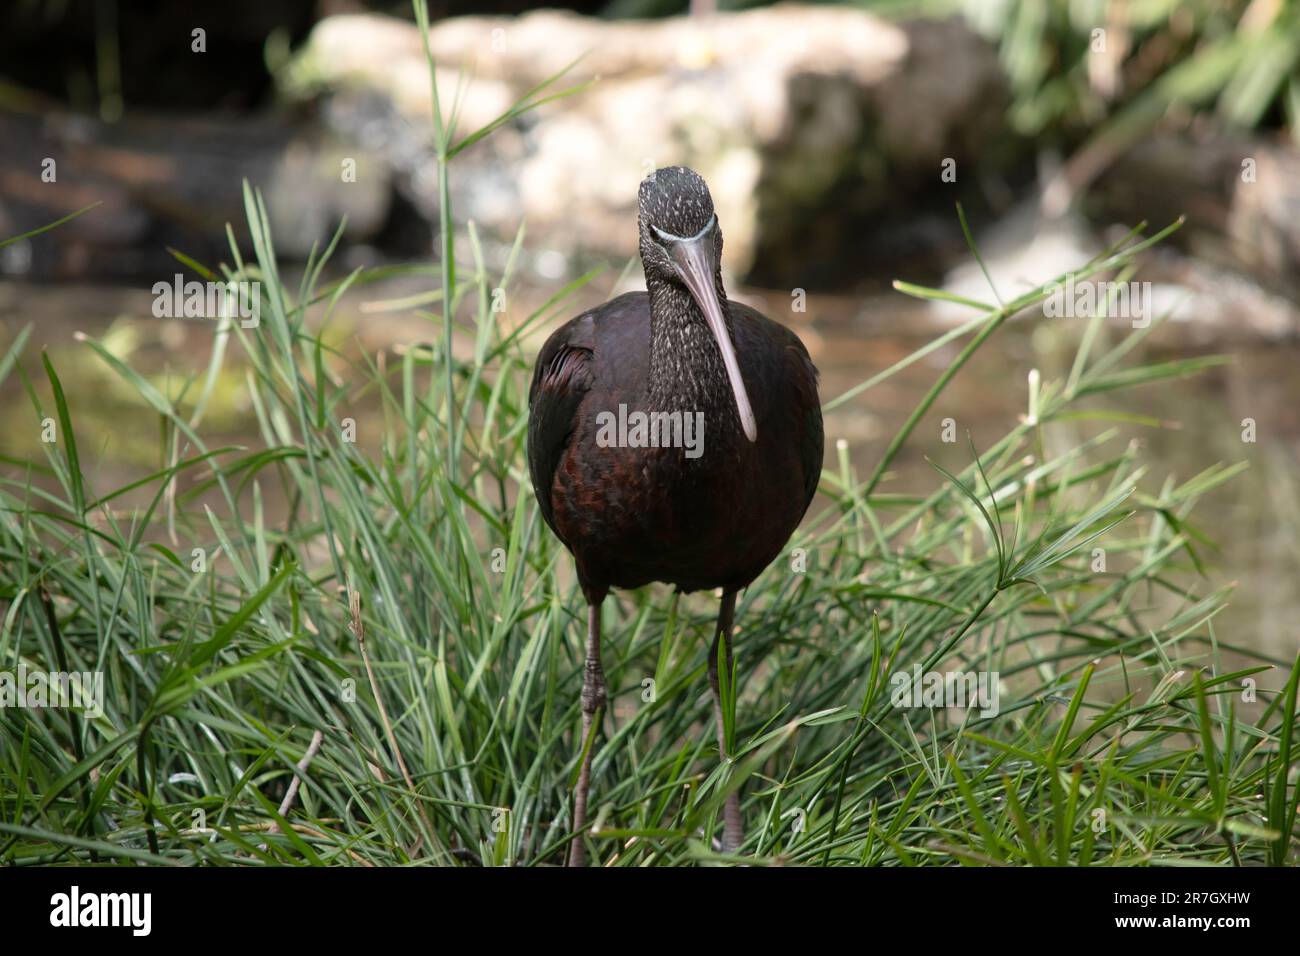 The glossy ibis neck is reddish-brown and the body is a bronze-brown with a metallic iridescent sheen on the wings. The Glossy Ibis has a distinctive Stock Photo